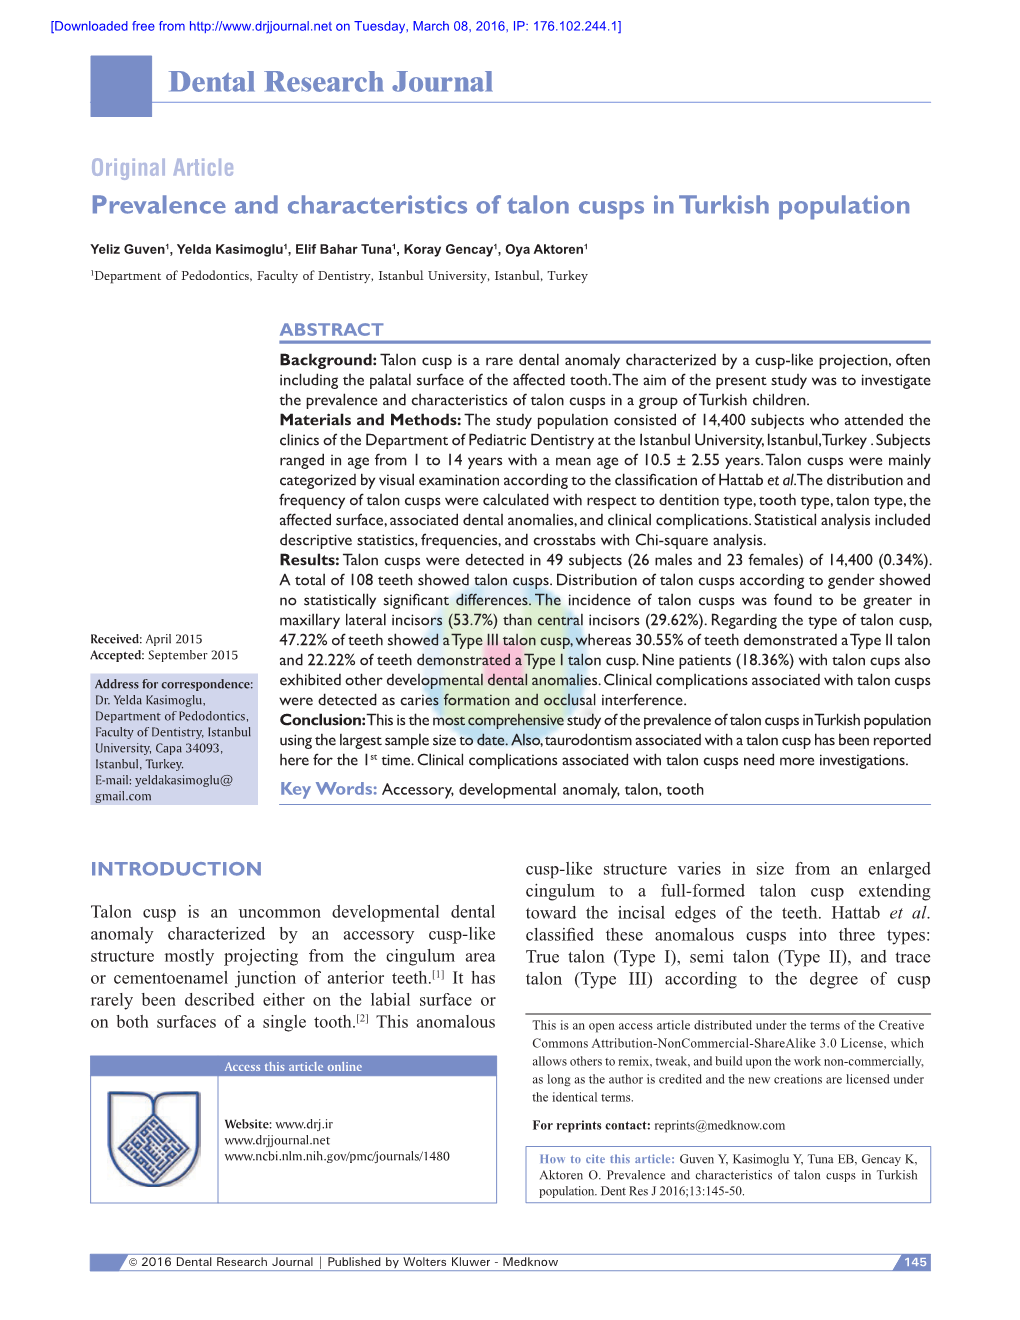 Prevalence and Characteristics of Talon Cusps in Turkish Population